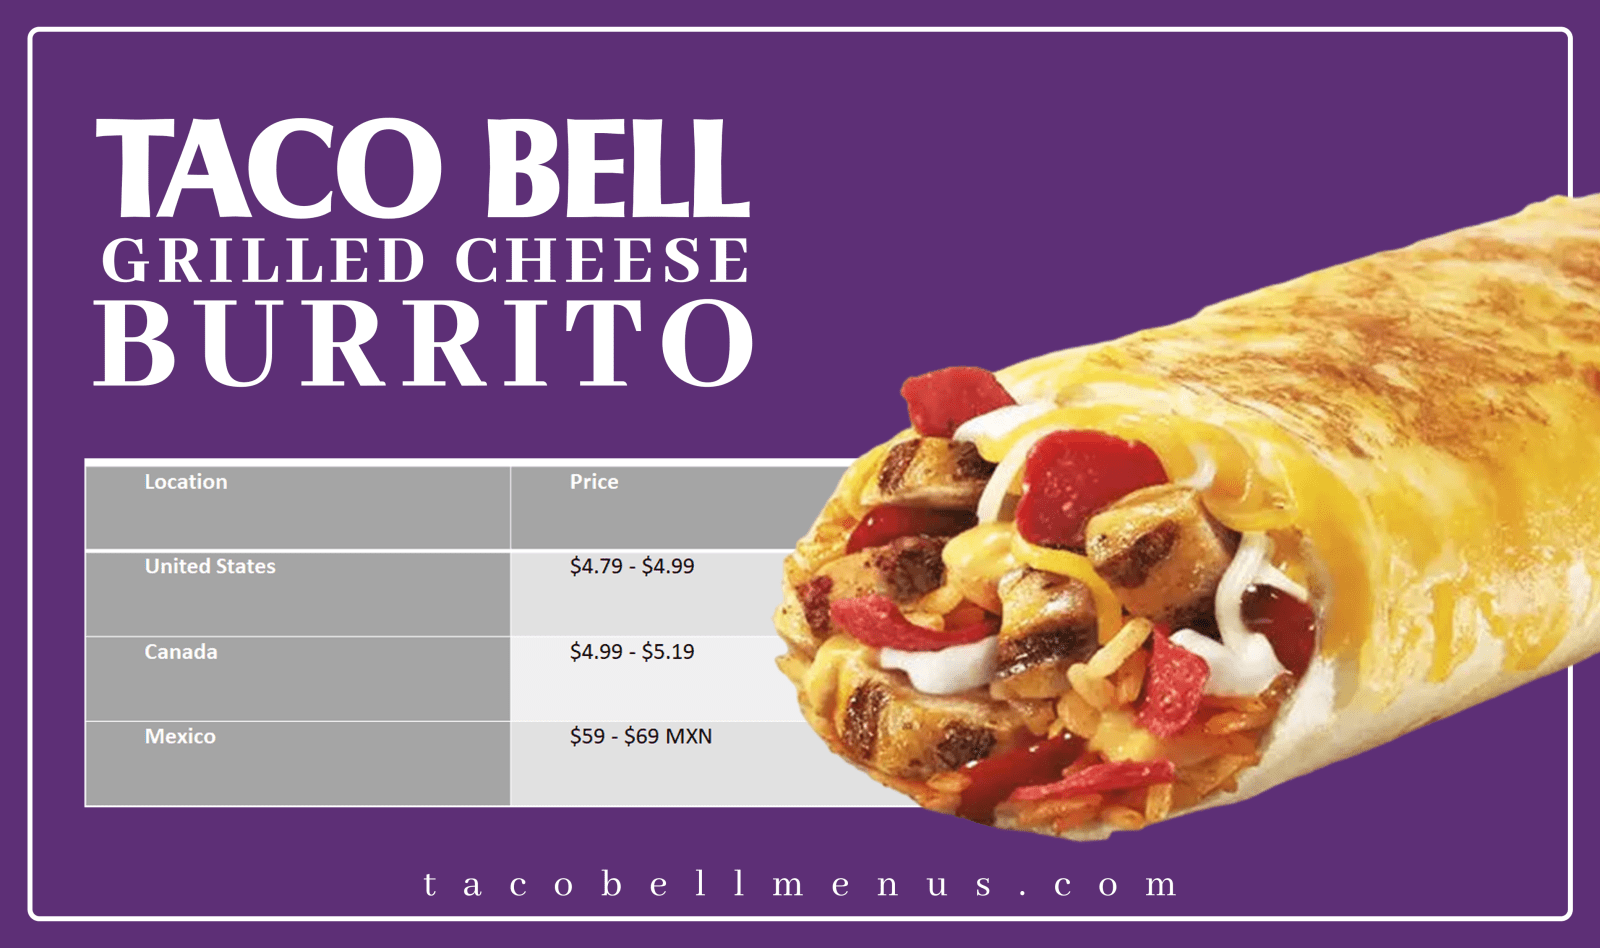 Grilled Cheese Burrito Taco Bell, grilled burrito taco bell, Grilled Cheese Burrito Calories, Grilled Cheese Burrito Recipe, Grilled Cheese Burrito Price